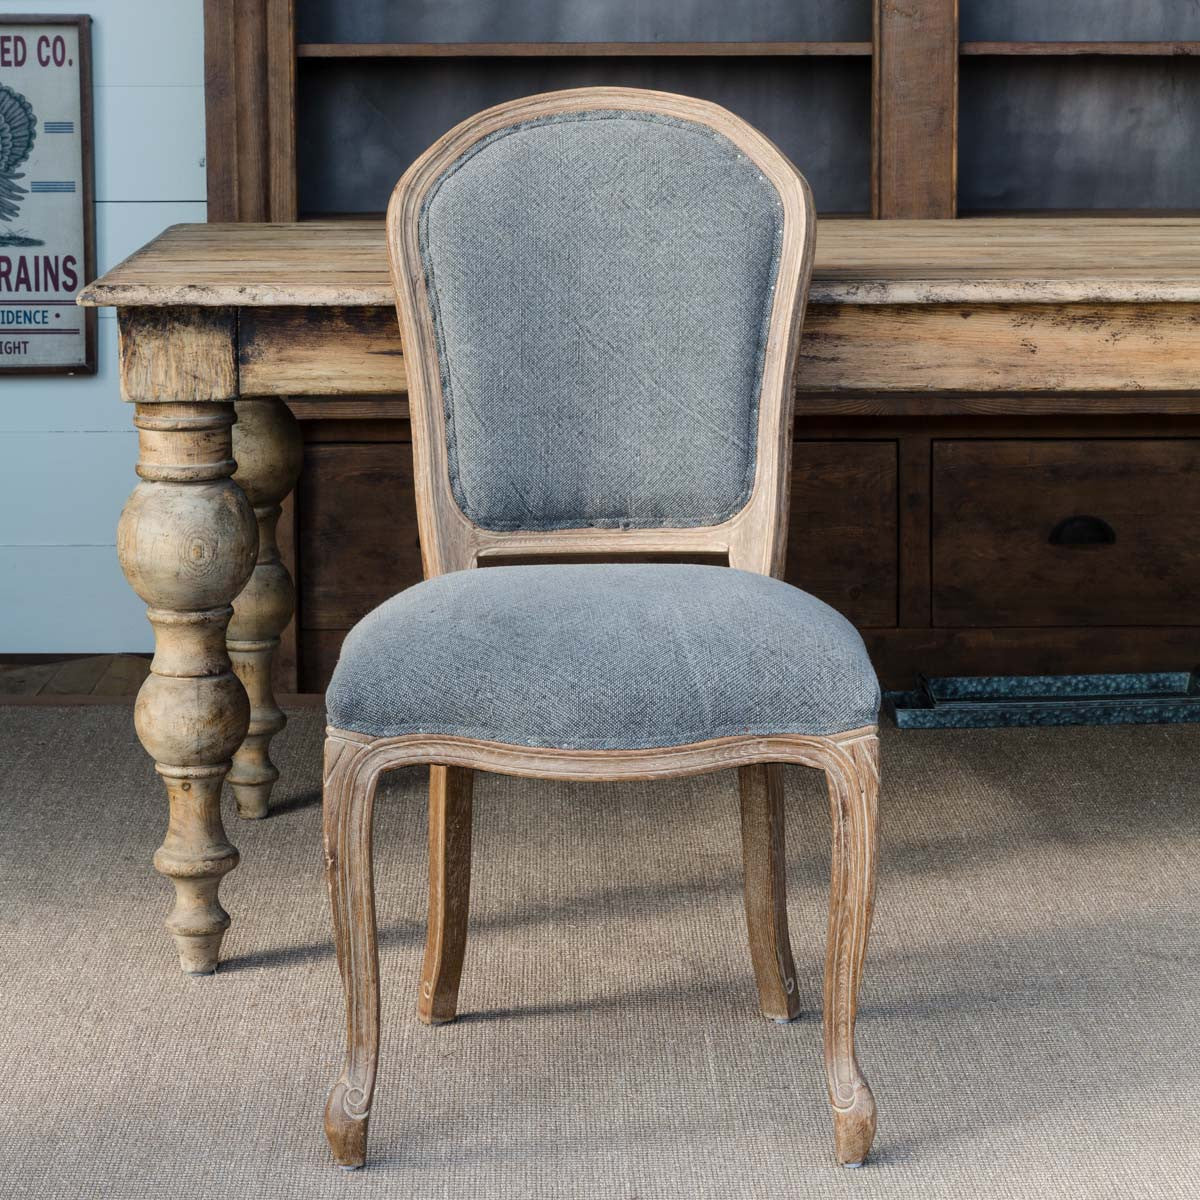 Capital Dining Chair Park Hill Collection, Grey Fabric French Country Dining Chairs